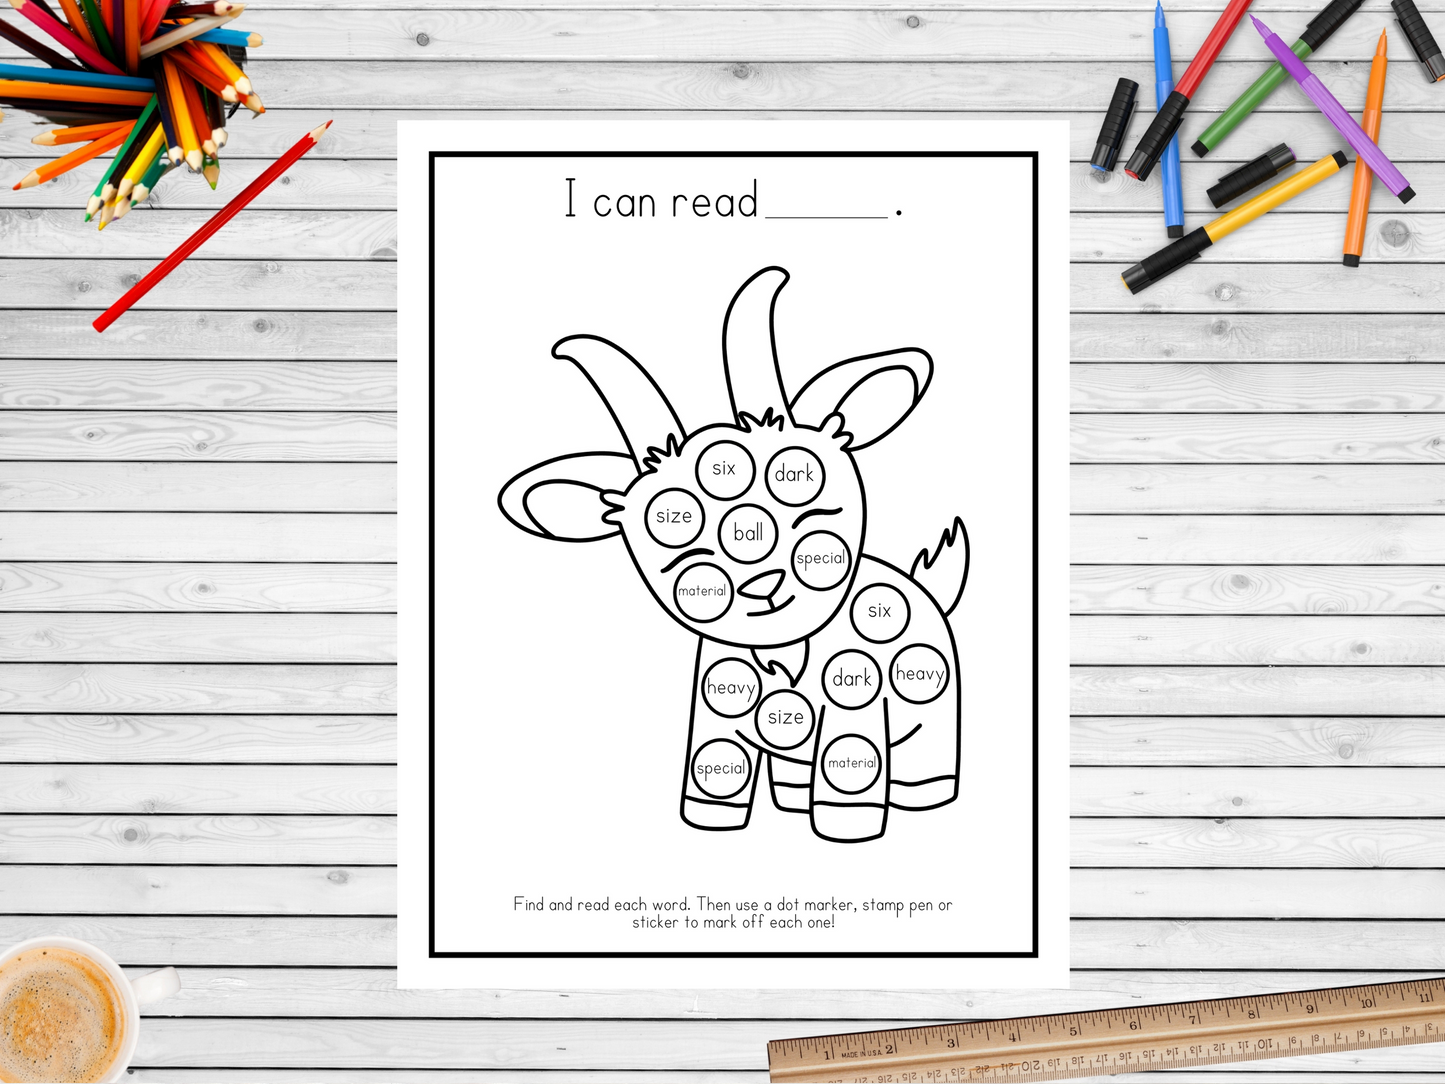 Dot Marker Reading Practice Coloring Pages | Fifth 100 Sight Words